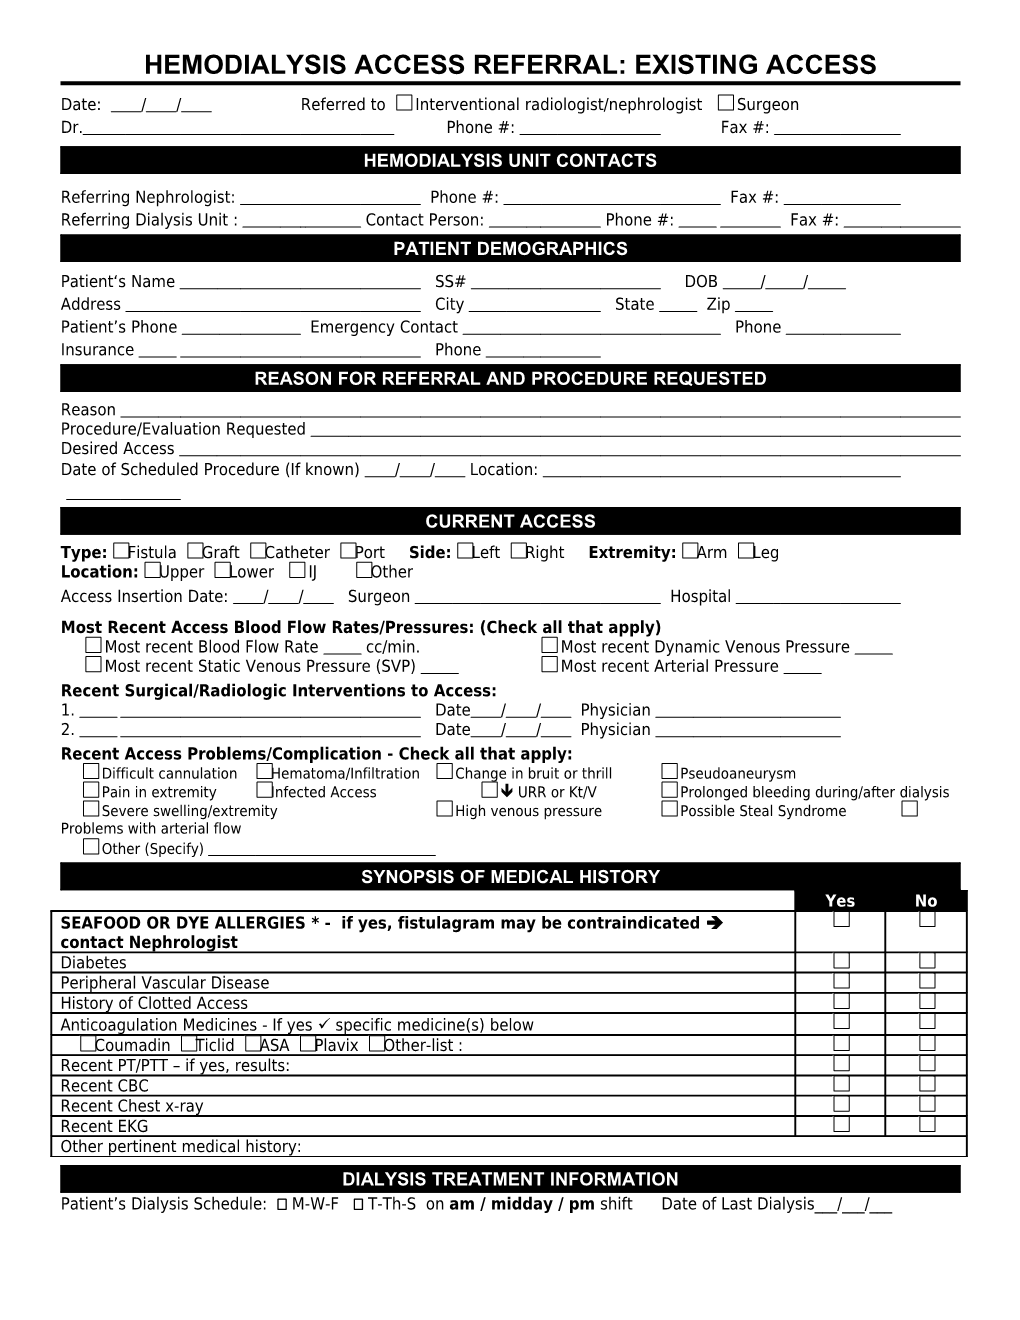 Hemodialysis Access Referral Form for Interventional Radiology/Surgery